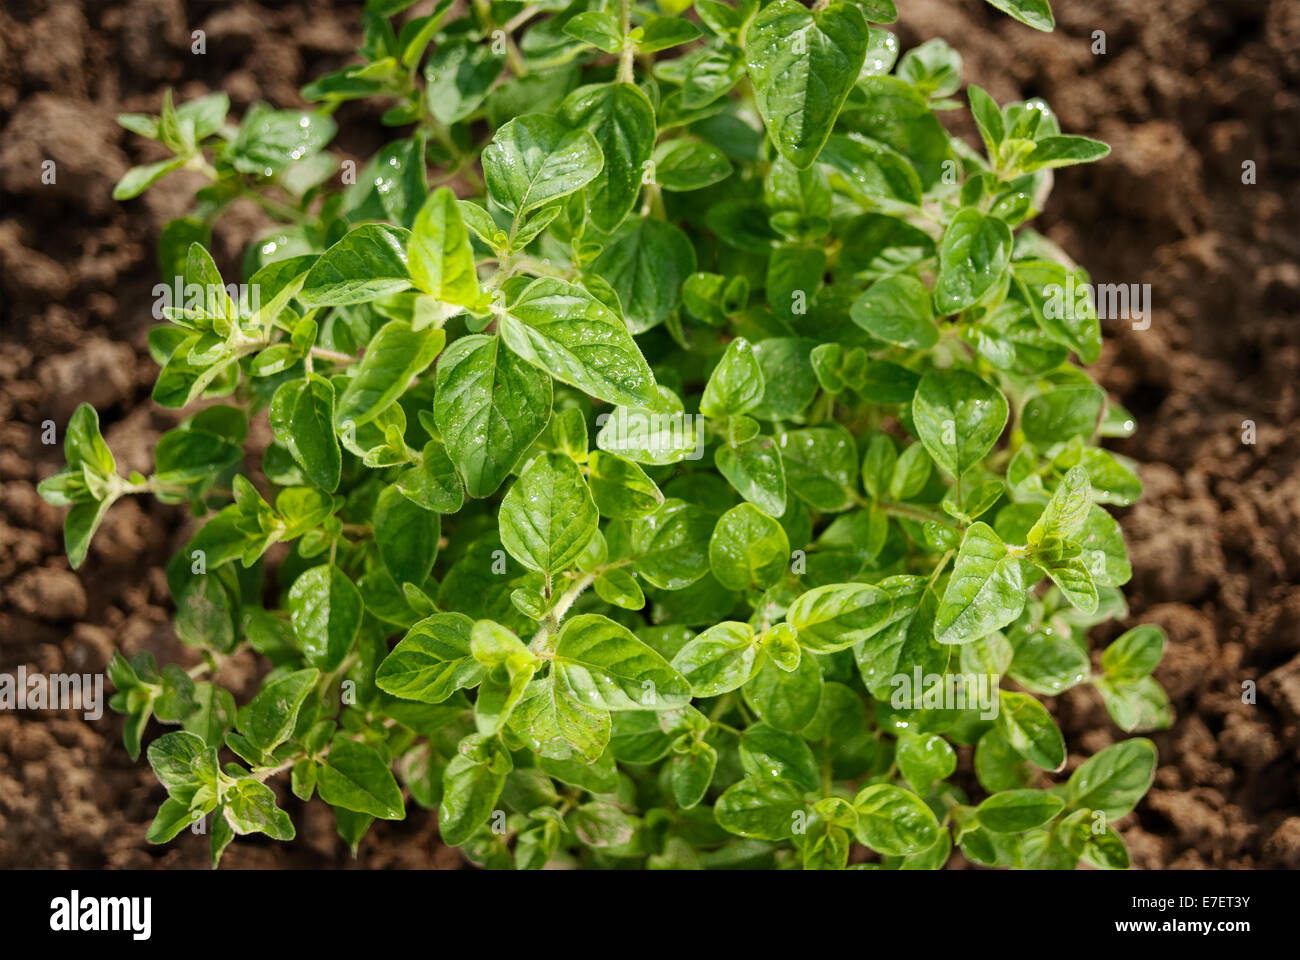 Young plant of organic basil. Stock Photo